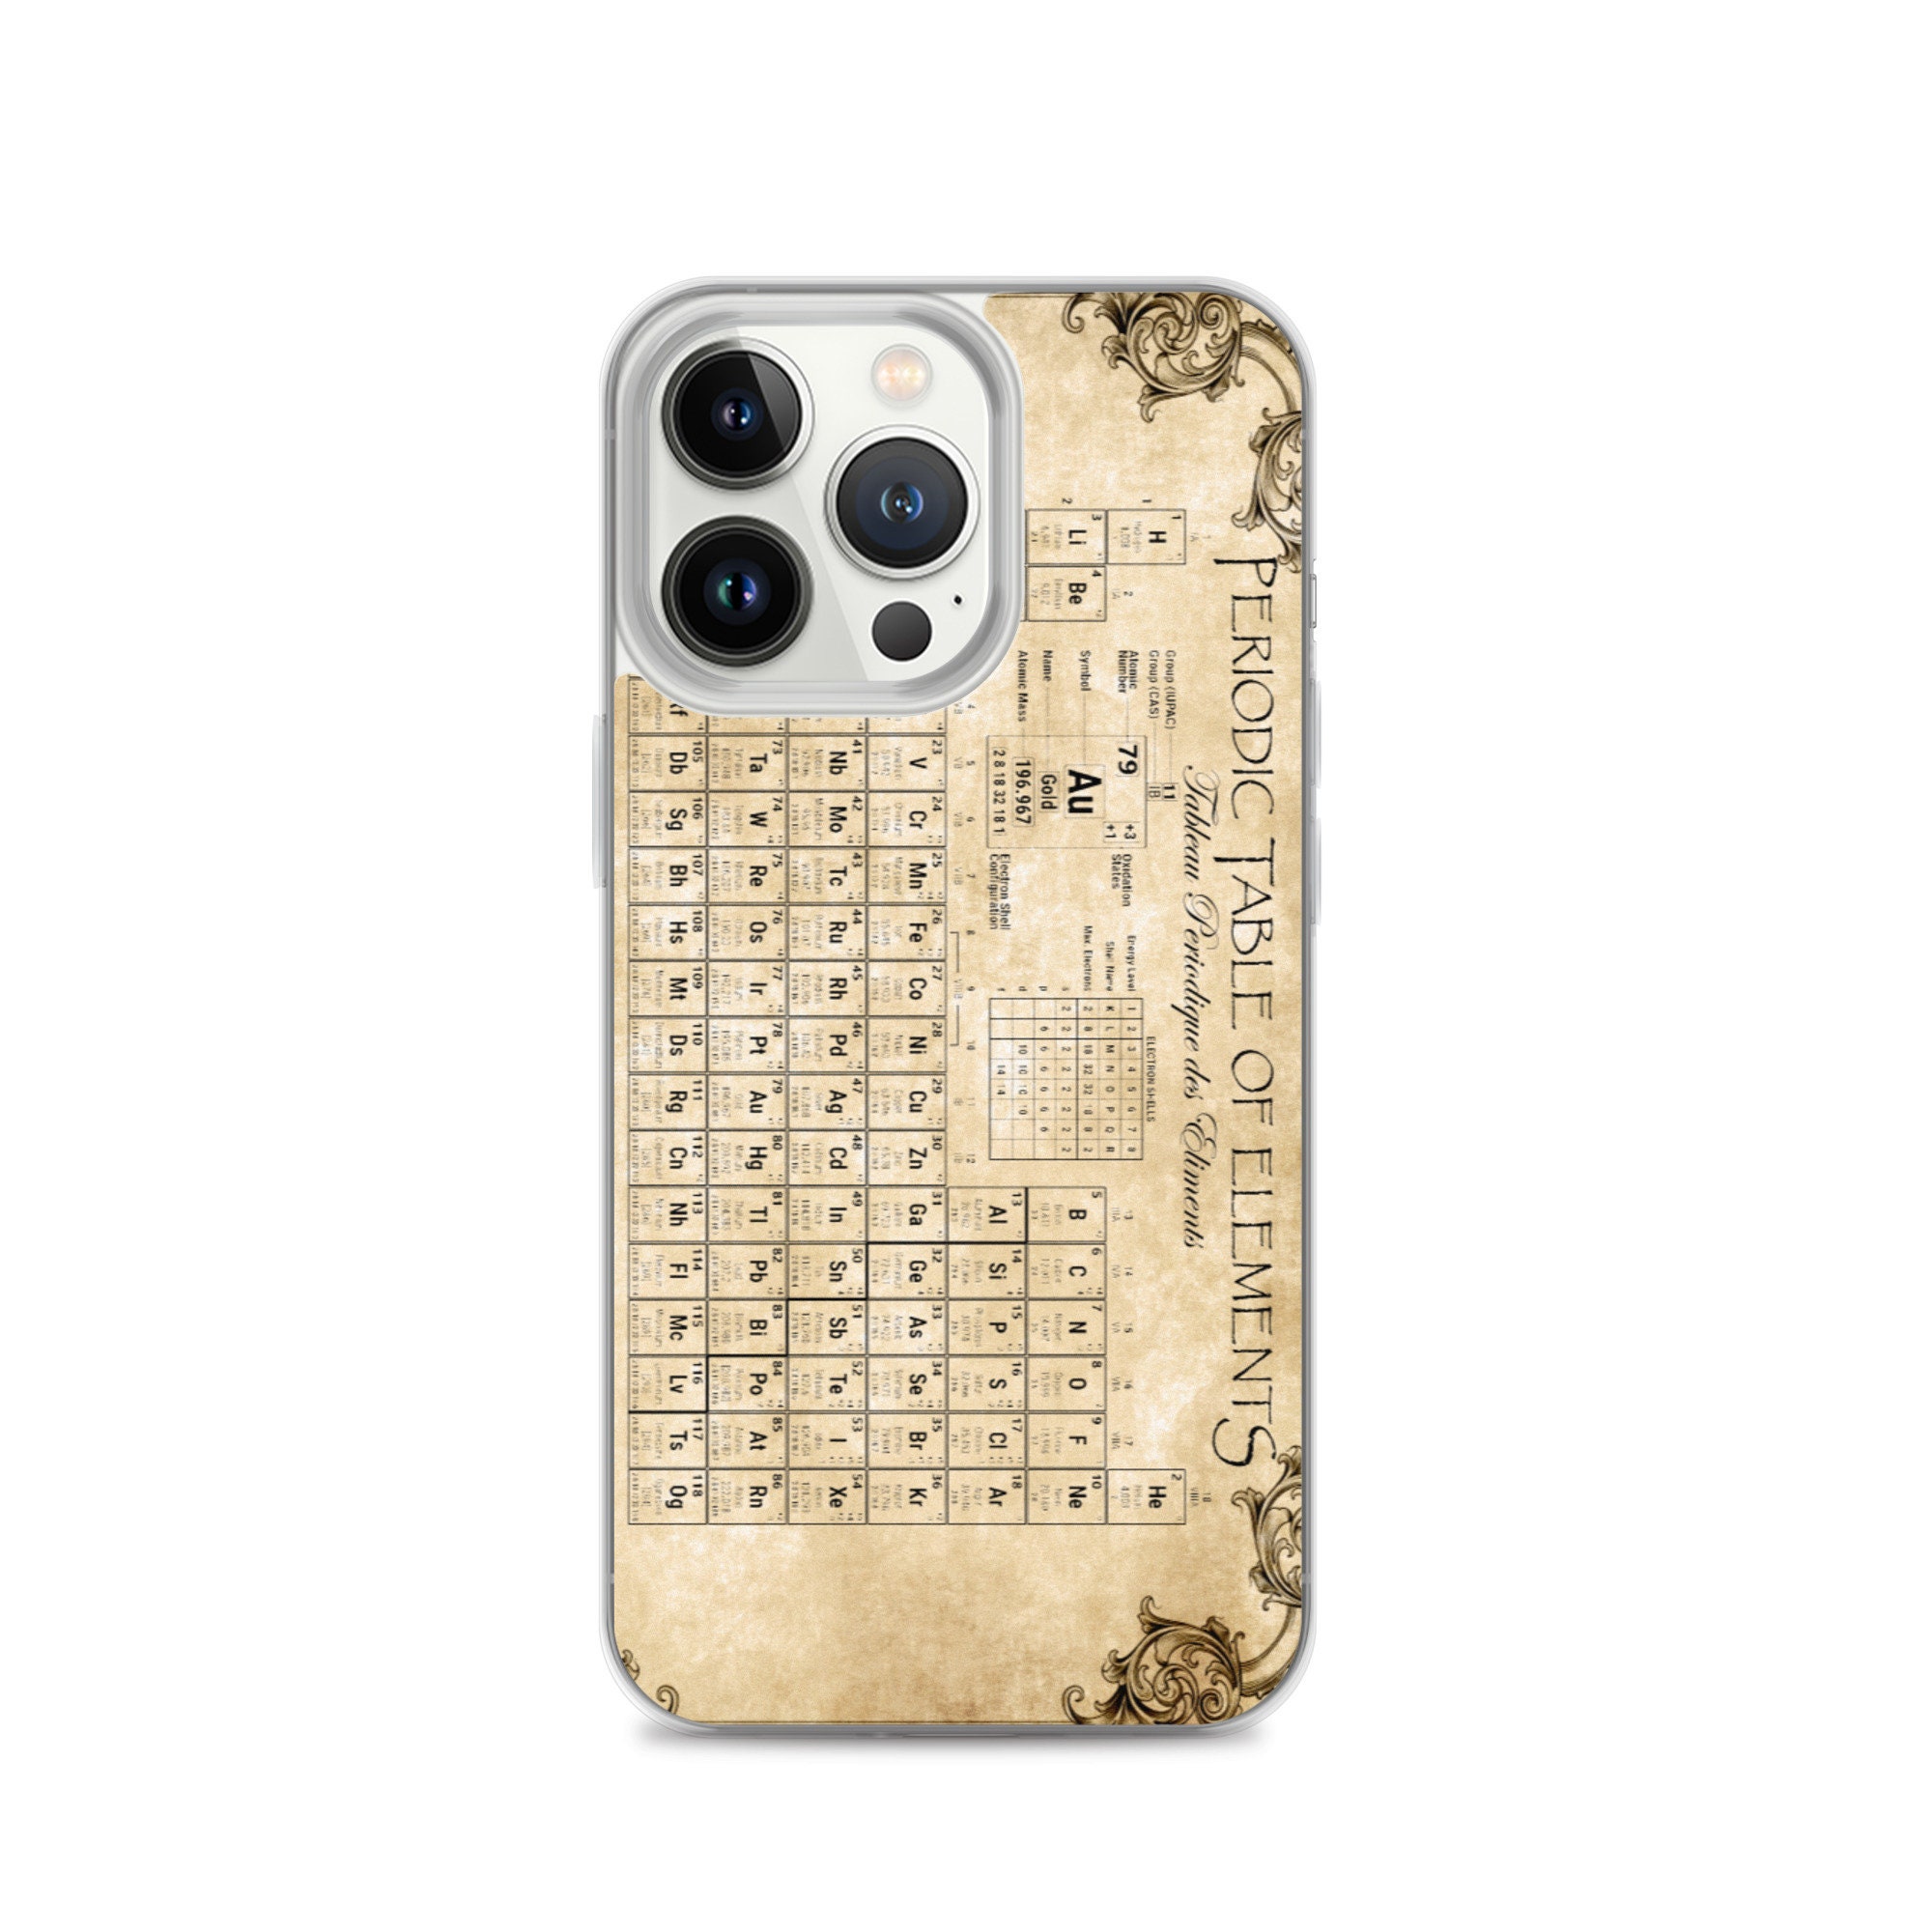 periodic table of elements iPhone Case by Bekim ART